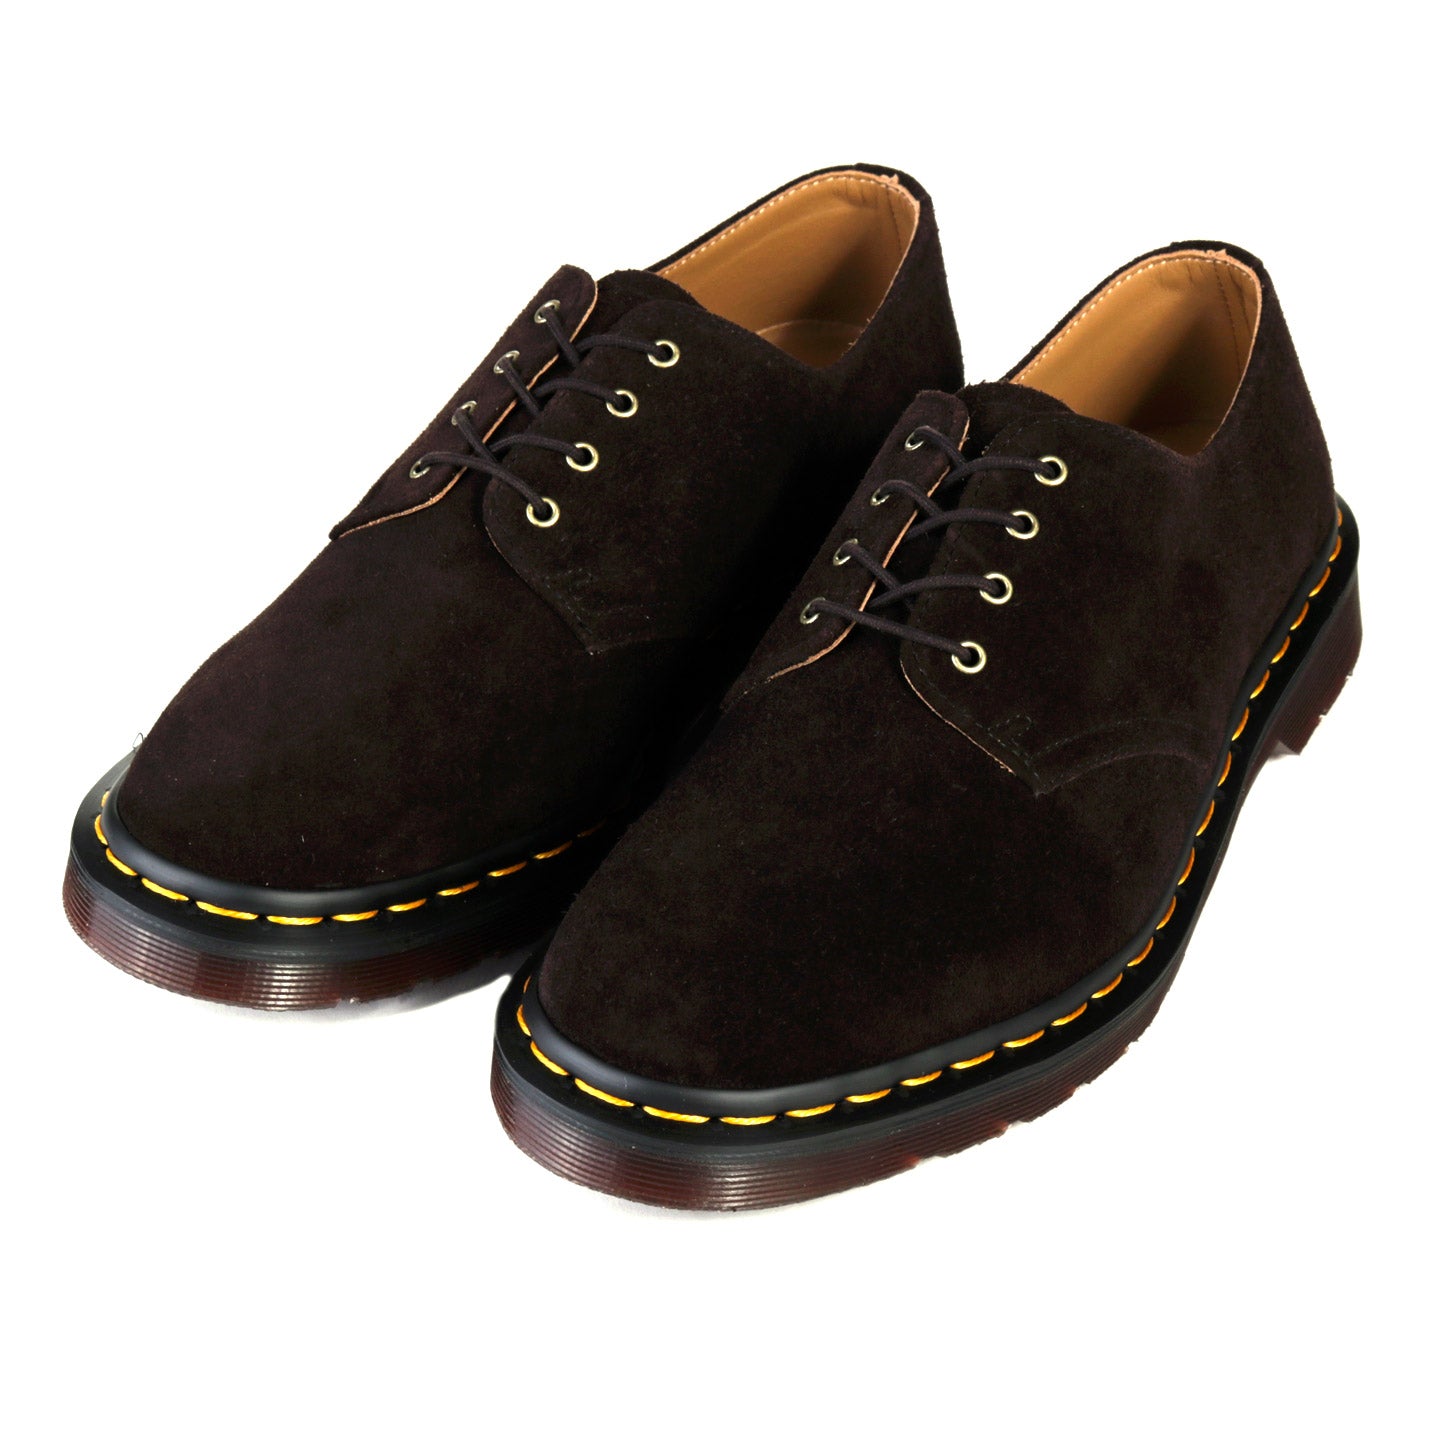 DR. MARTENS SMITHS CHOCOLATE SUEDE